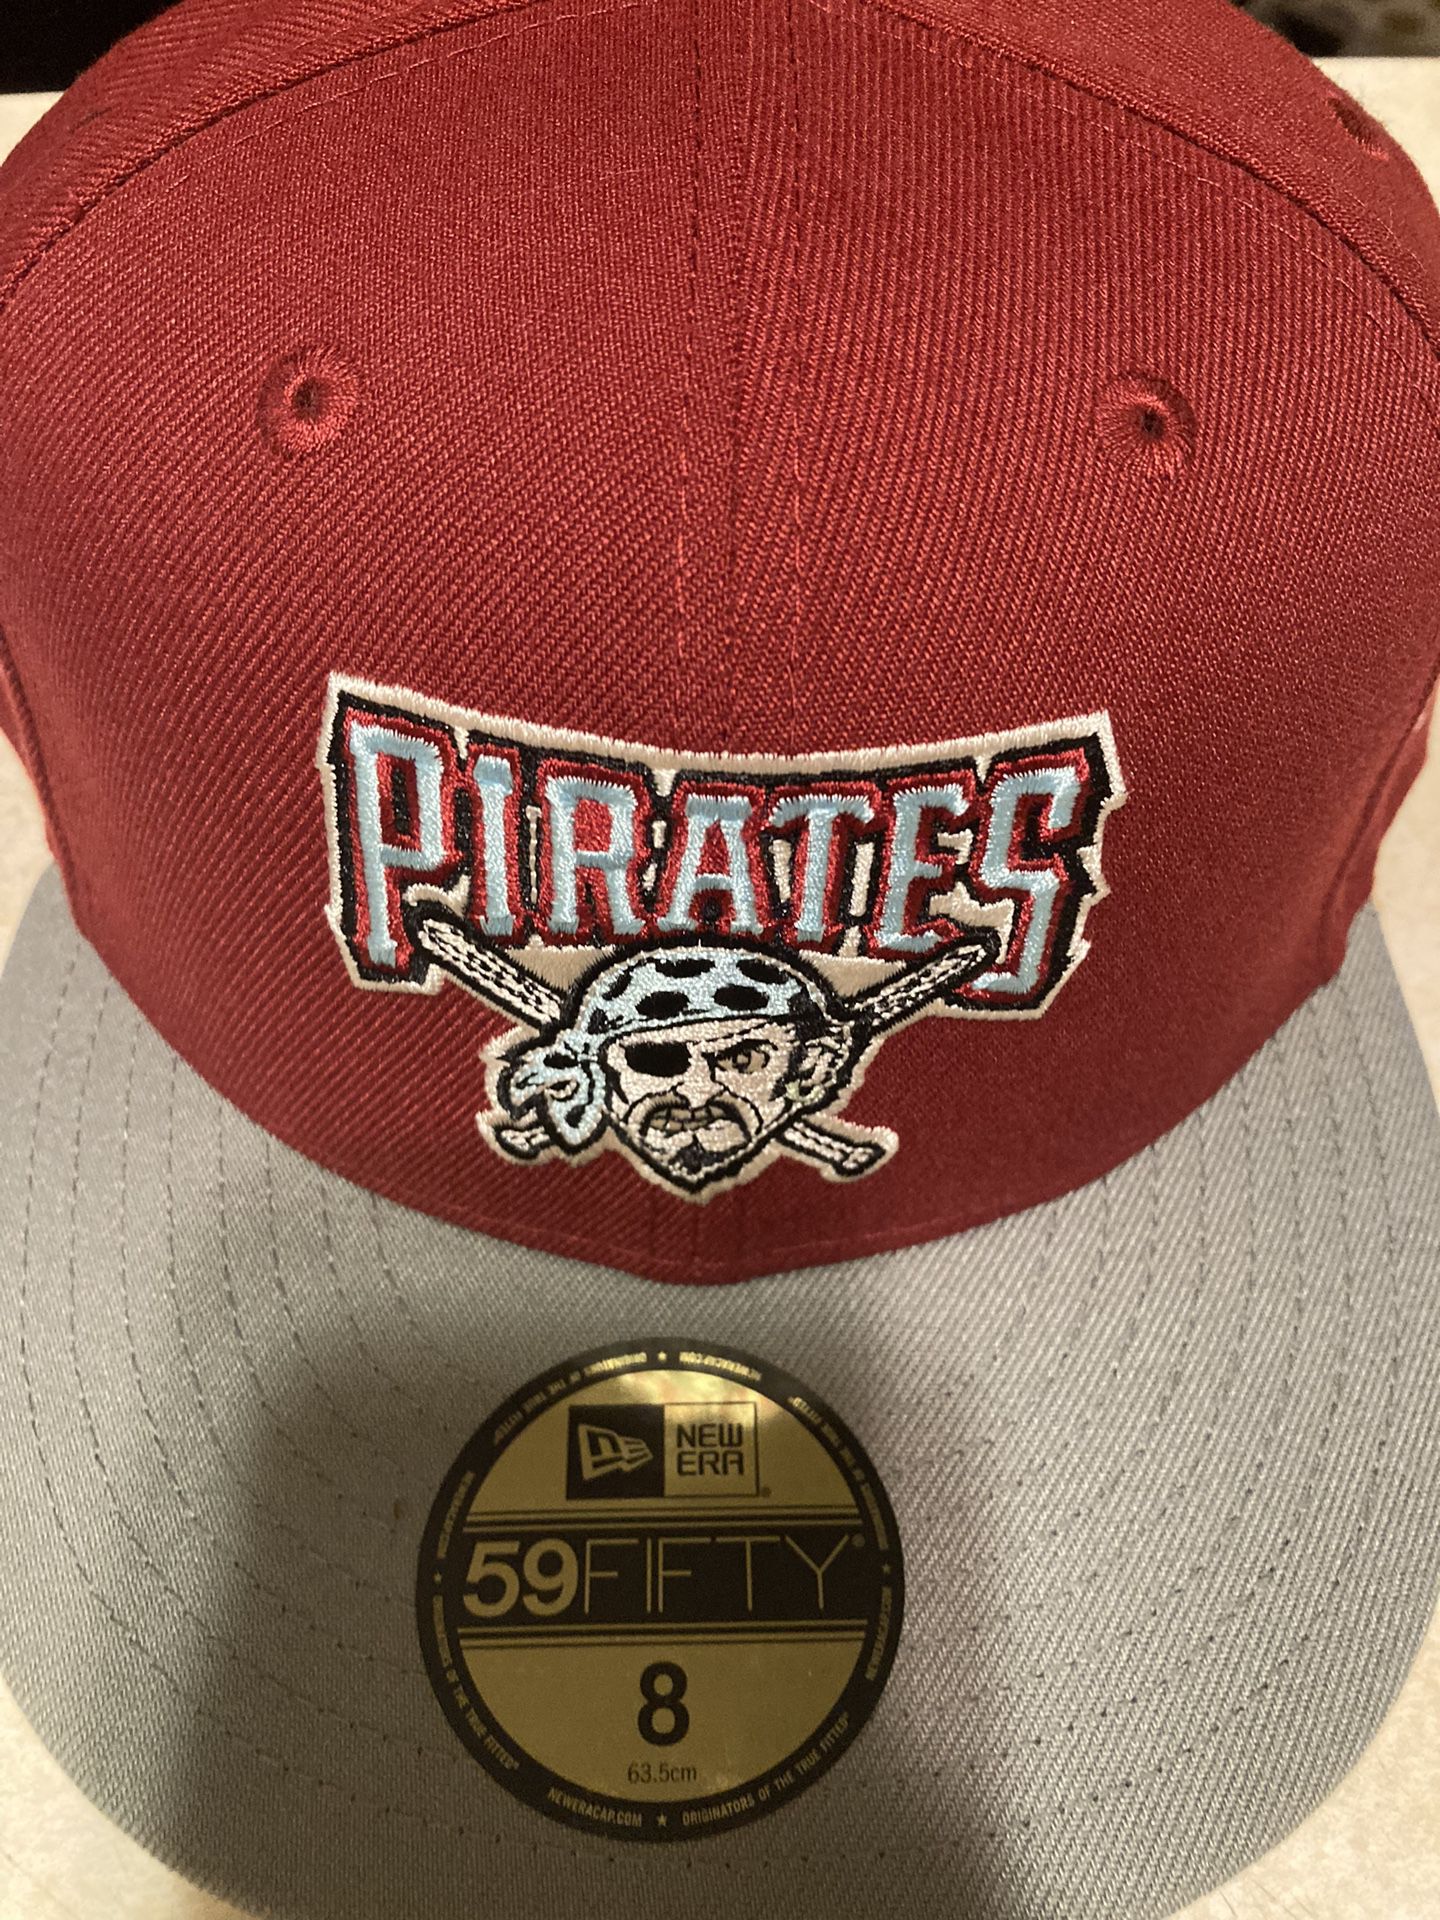 Pittsburgh Pirates Fitted Hat 